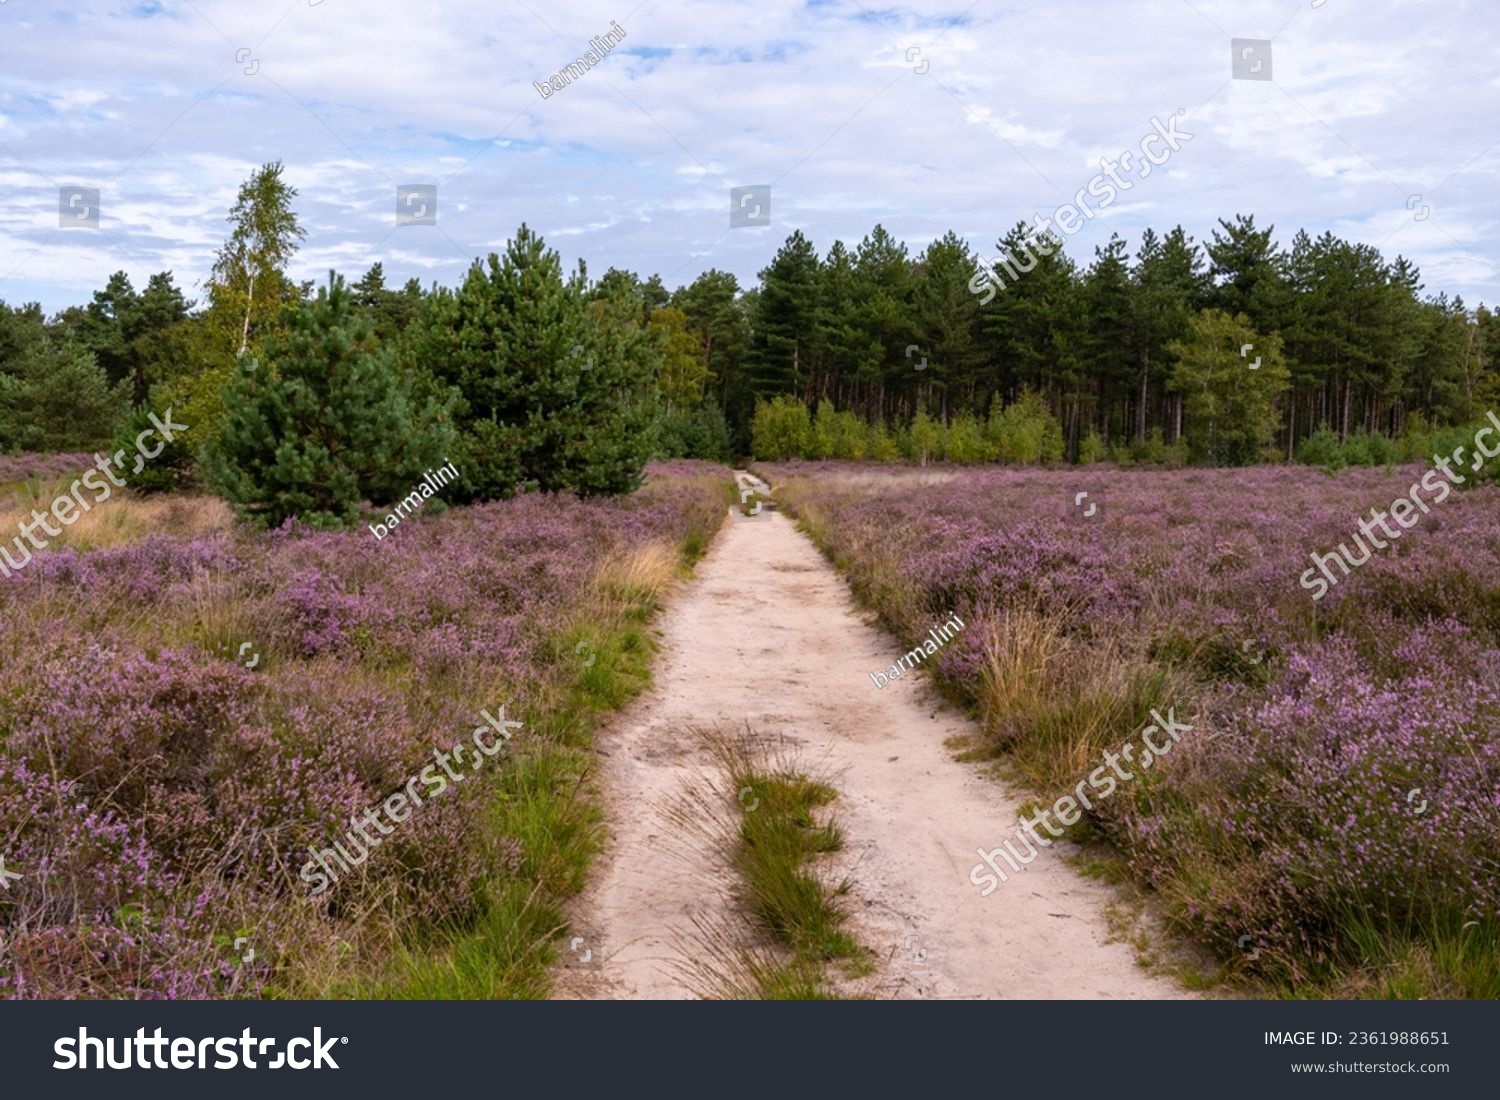 Nature background, green lung of North Brabant, pink blossom of heather plants in Kempen forest in August, the Netherlands #2361988651